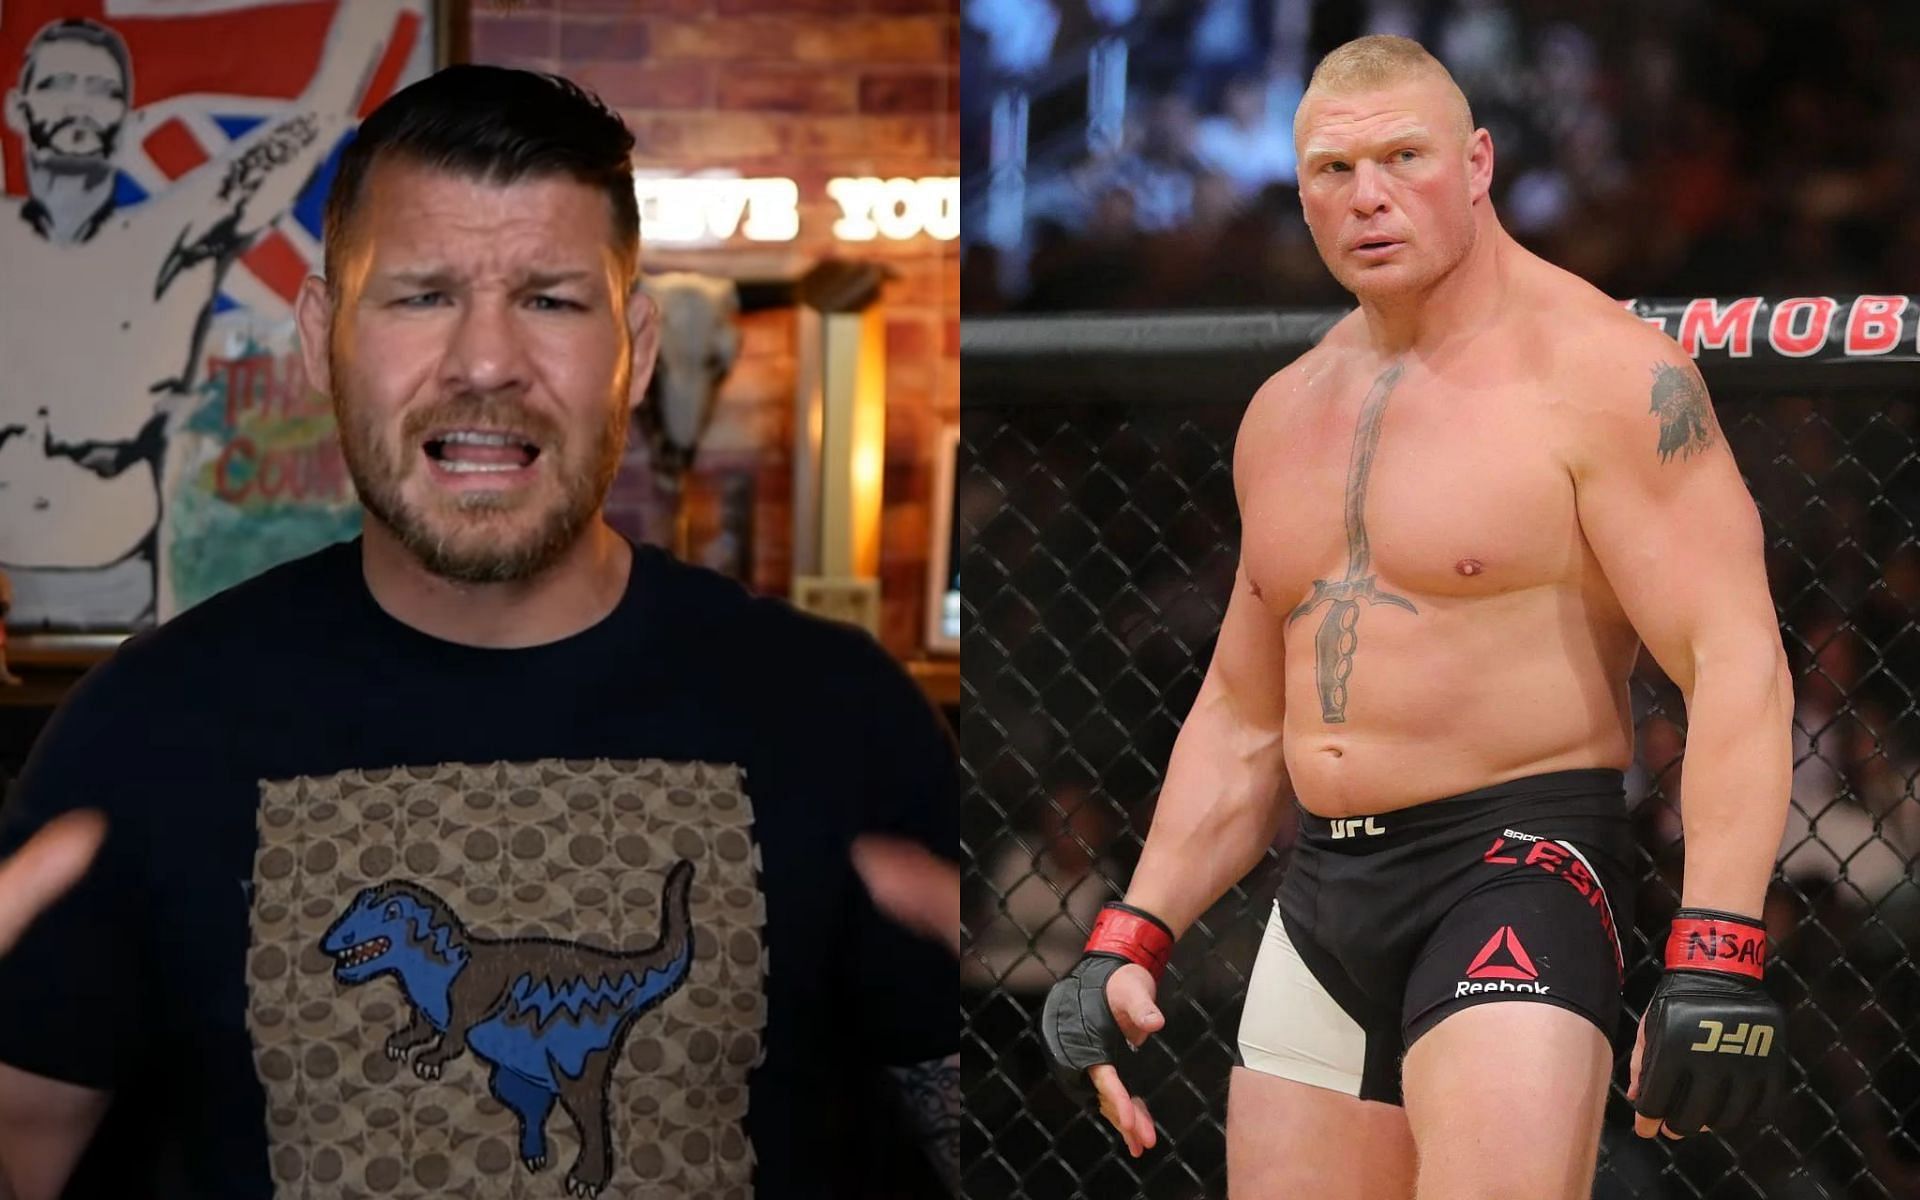 Michael Bisping (left), Brock Lesnar (right) [Bisping Image courtesy YouTube/MichaelBisping]